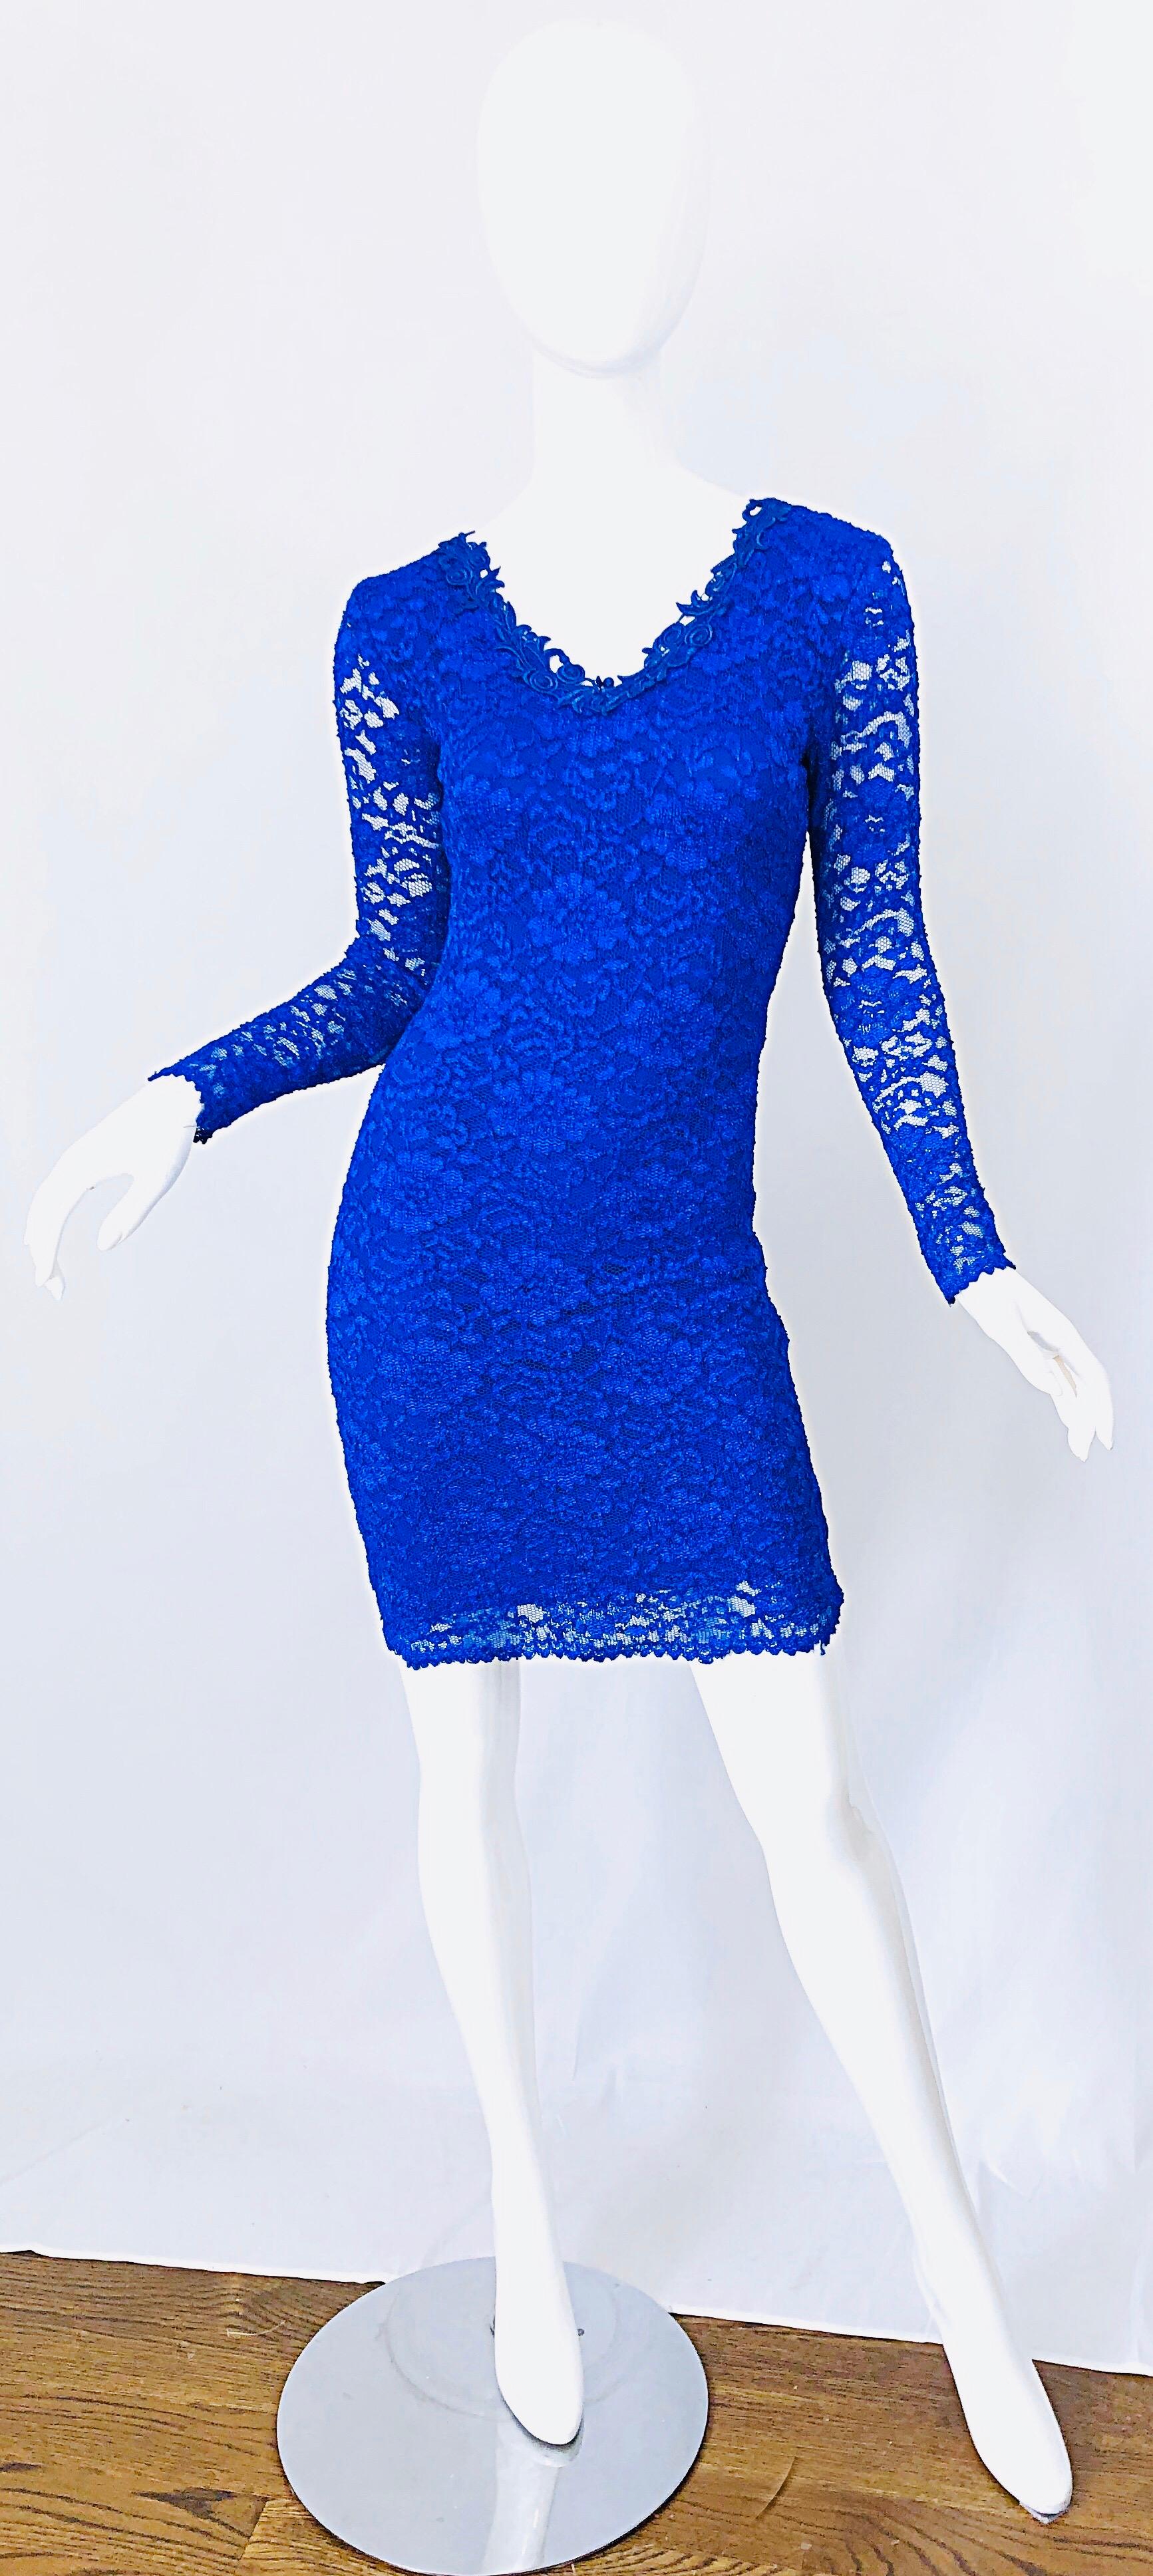 Sexy yet classy 1990s royal / cobalt blue lace long sleeve bodycon dress! Features a vibrant color blue that looks great on any skin tone. Stretch matte jersey base with lace overlay and semi sheer sleeves. Hidden zipper up the back with